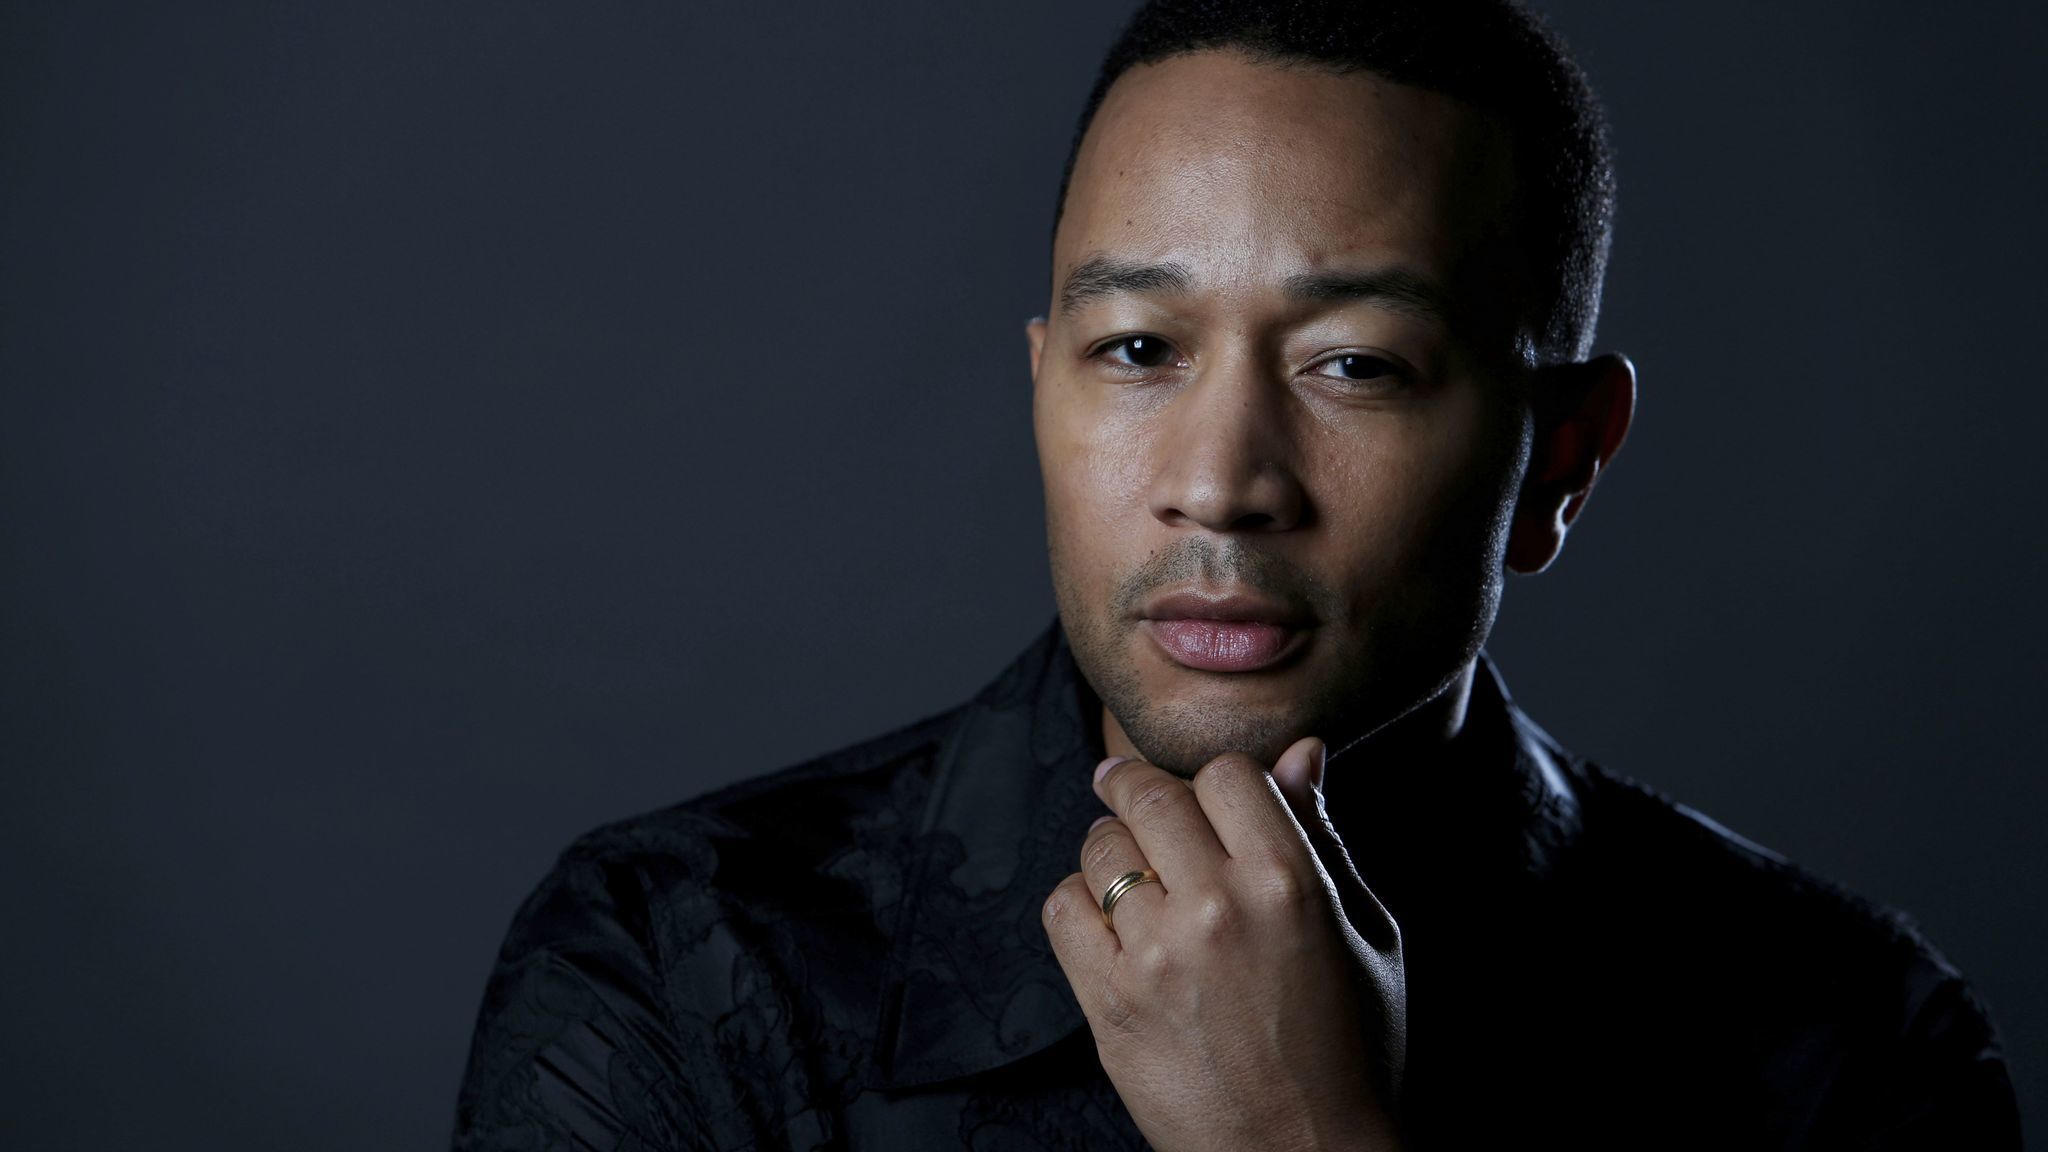 With topical 'Darkness and Light,' John Legend wants to 'contribute to